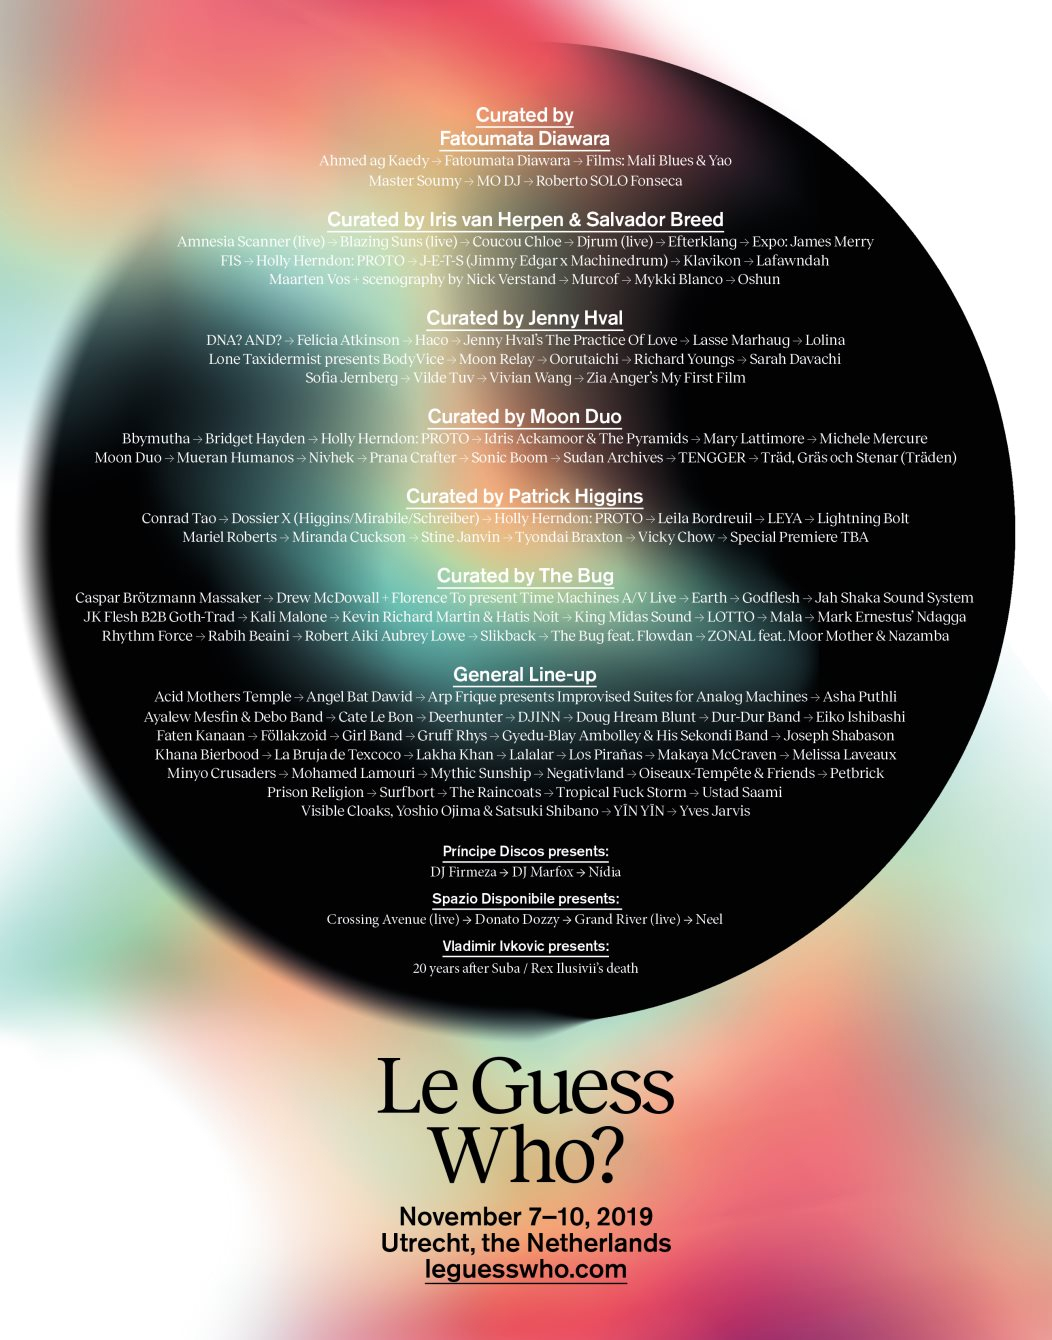 Le Guess Who? 2019 - Flyer front